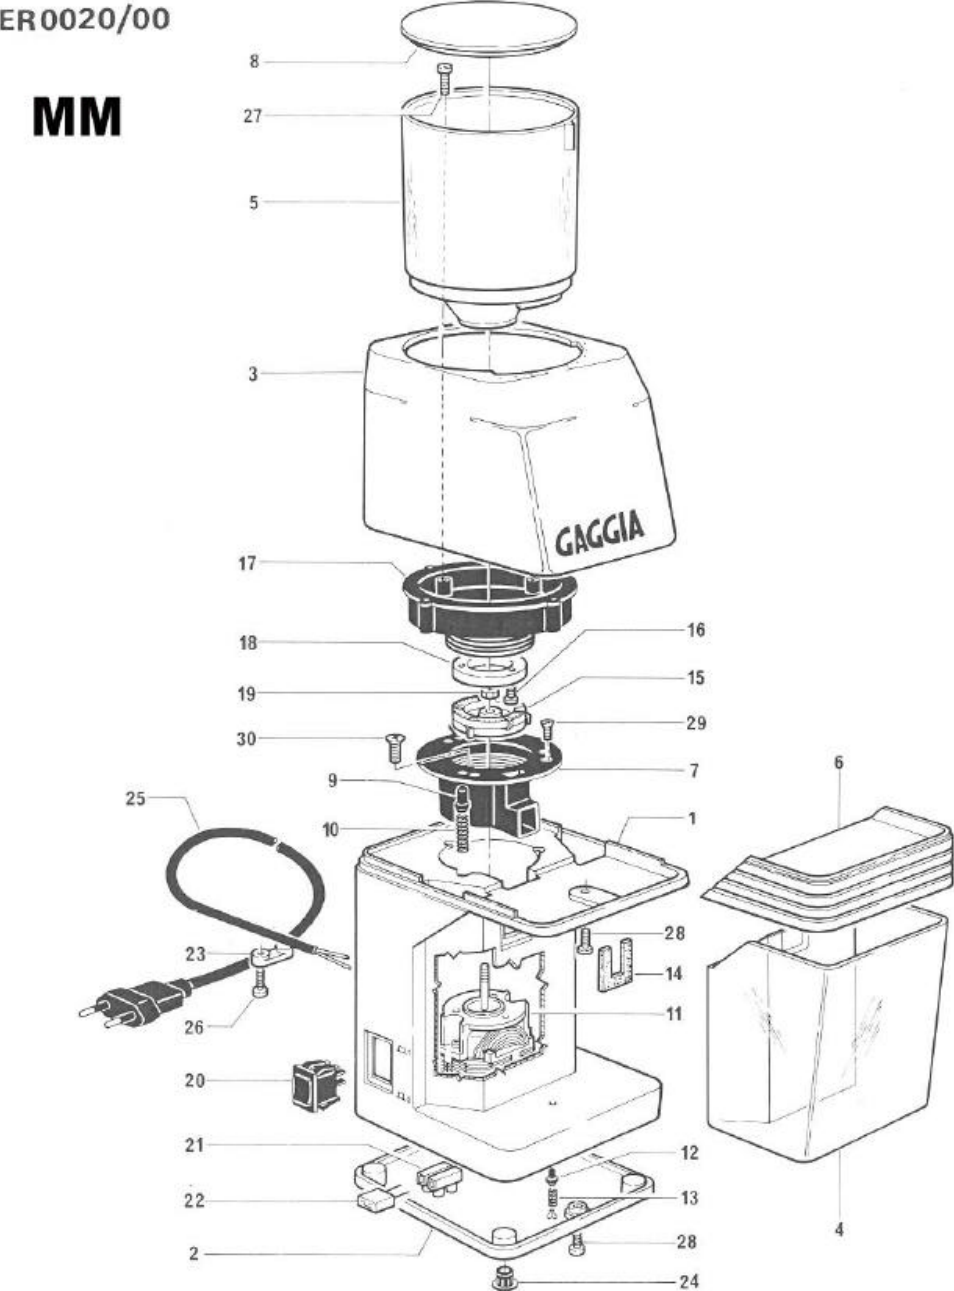 Page 1 of 2 - Gaggia Mm Parts Diagram Mm_ed User Manual